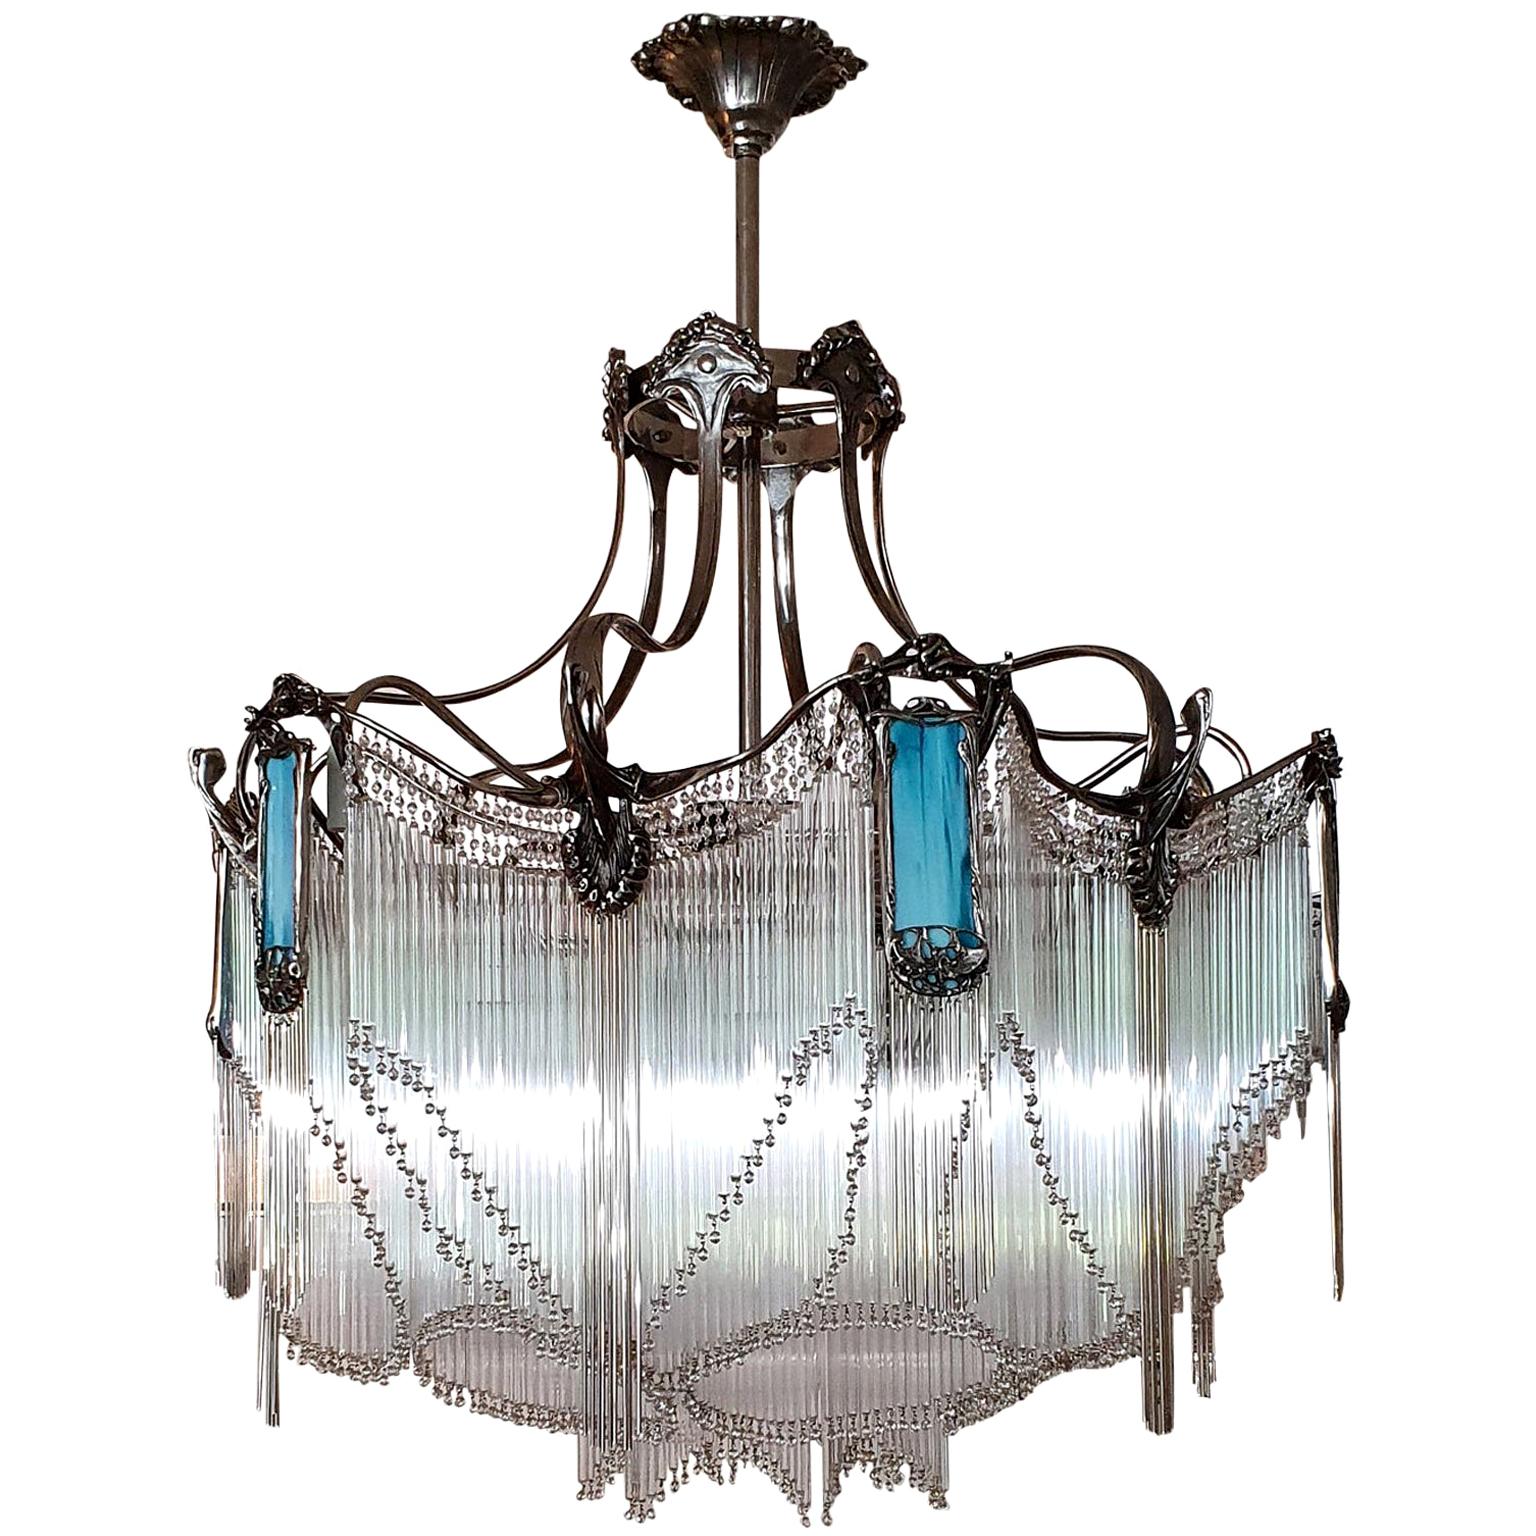 Big size French bronze Guimard's chandelier with nickel finish and blue pâte de 